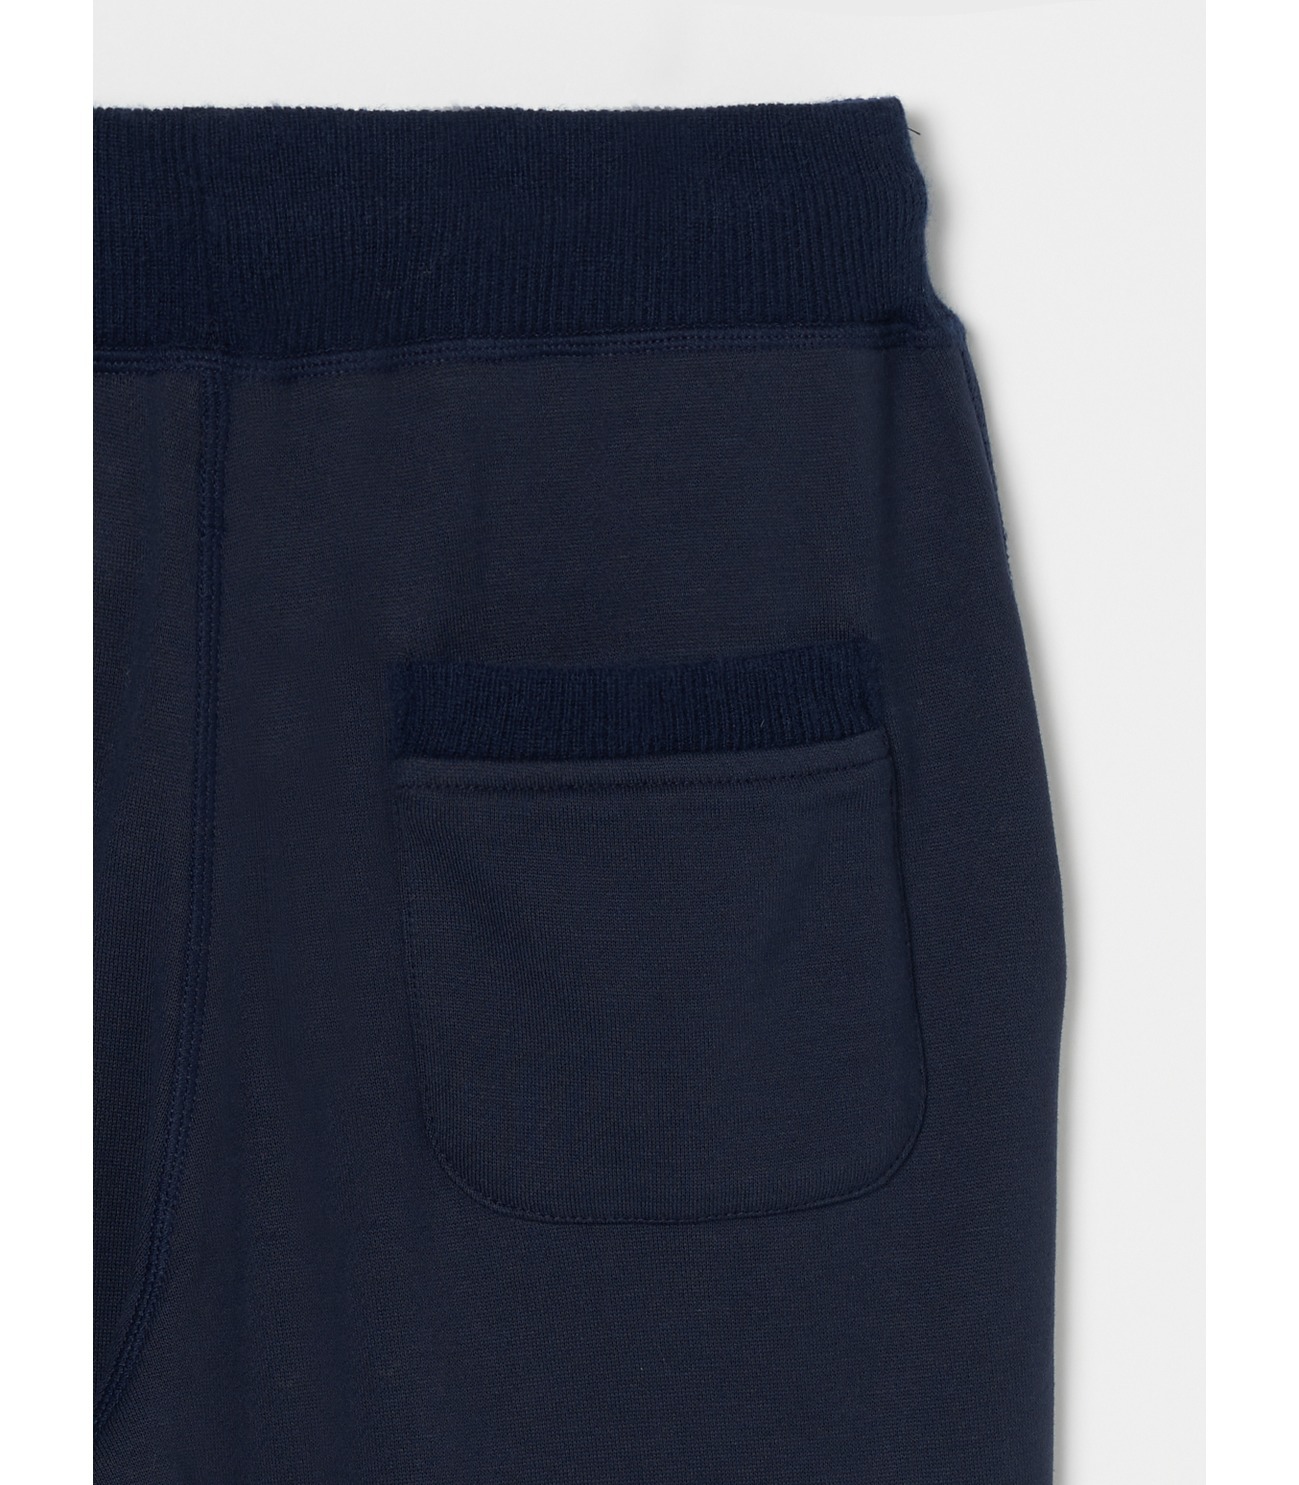 Cashmere×new soft terry pants 詳細画像 navy 10